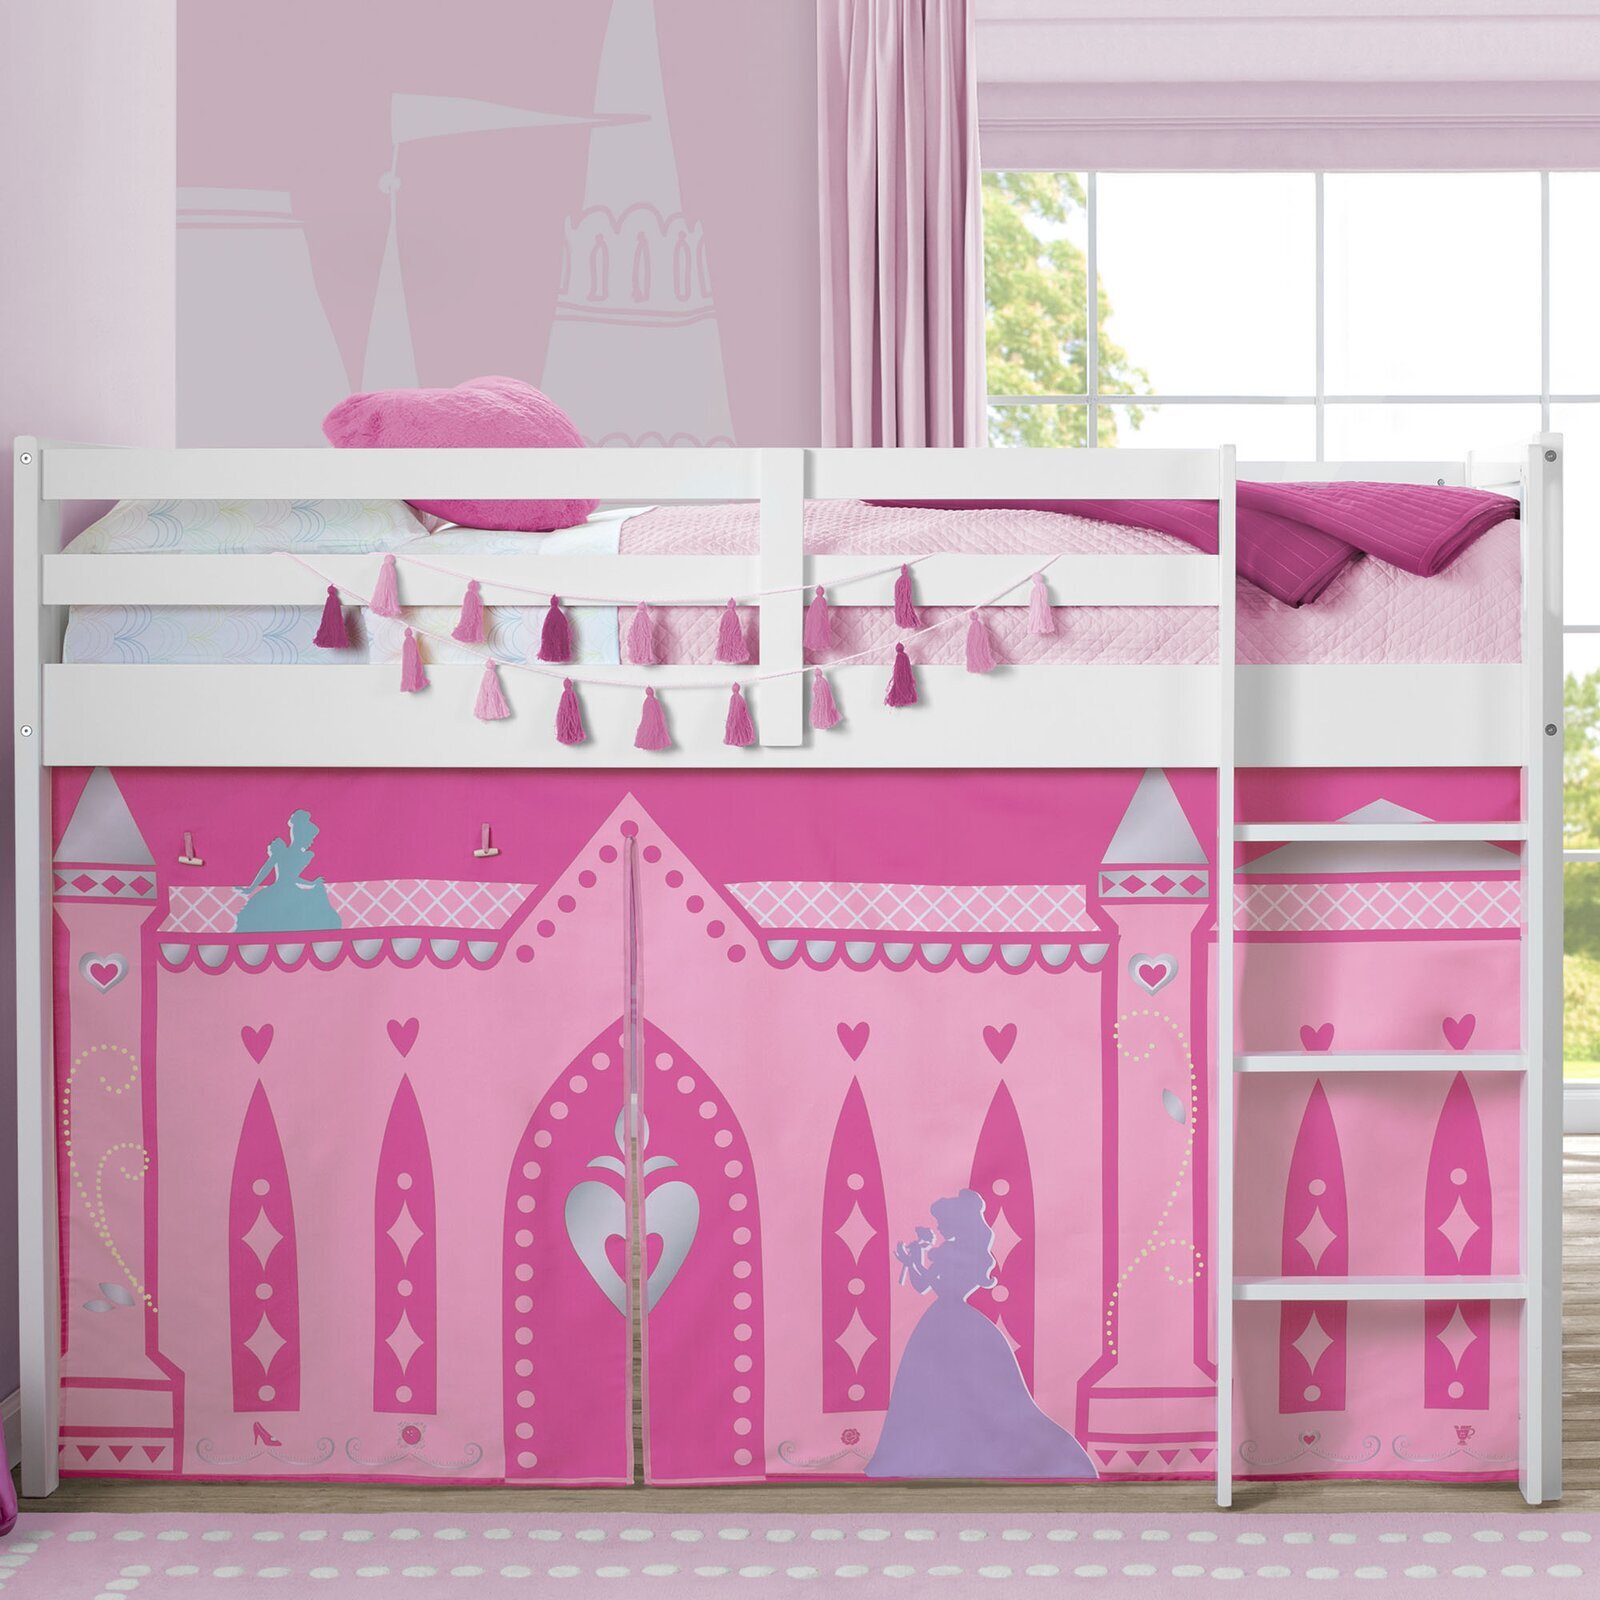 Bunk bed cover tent that’s fit for a princess